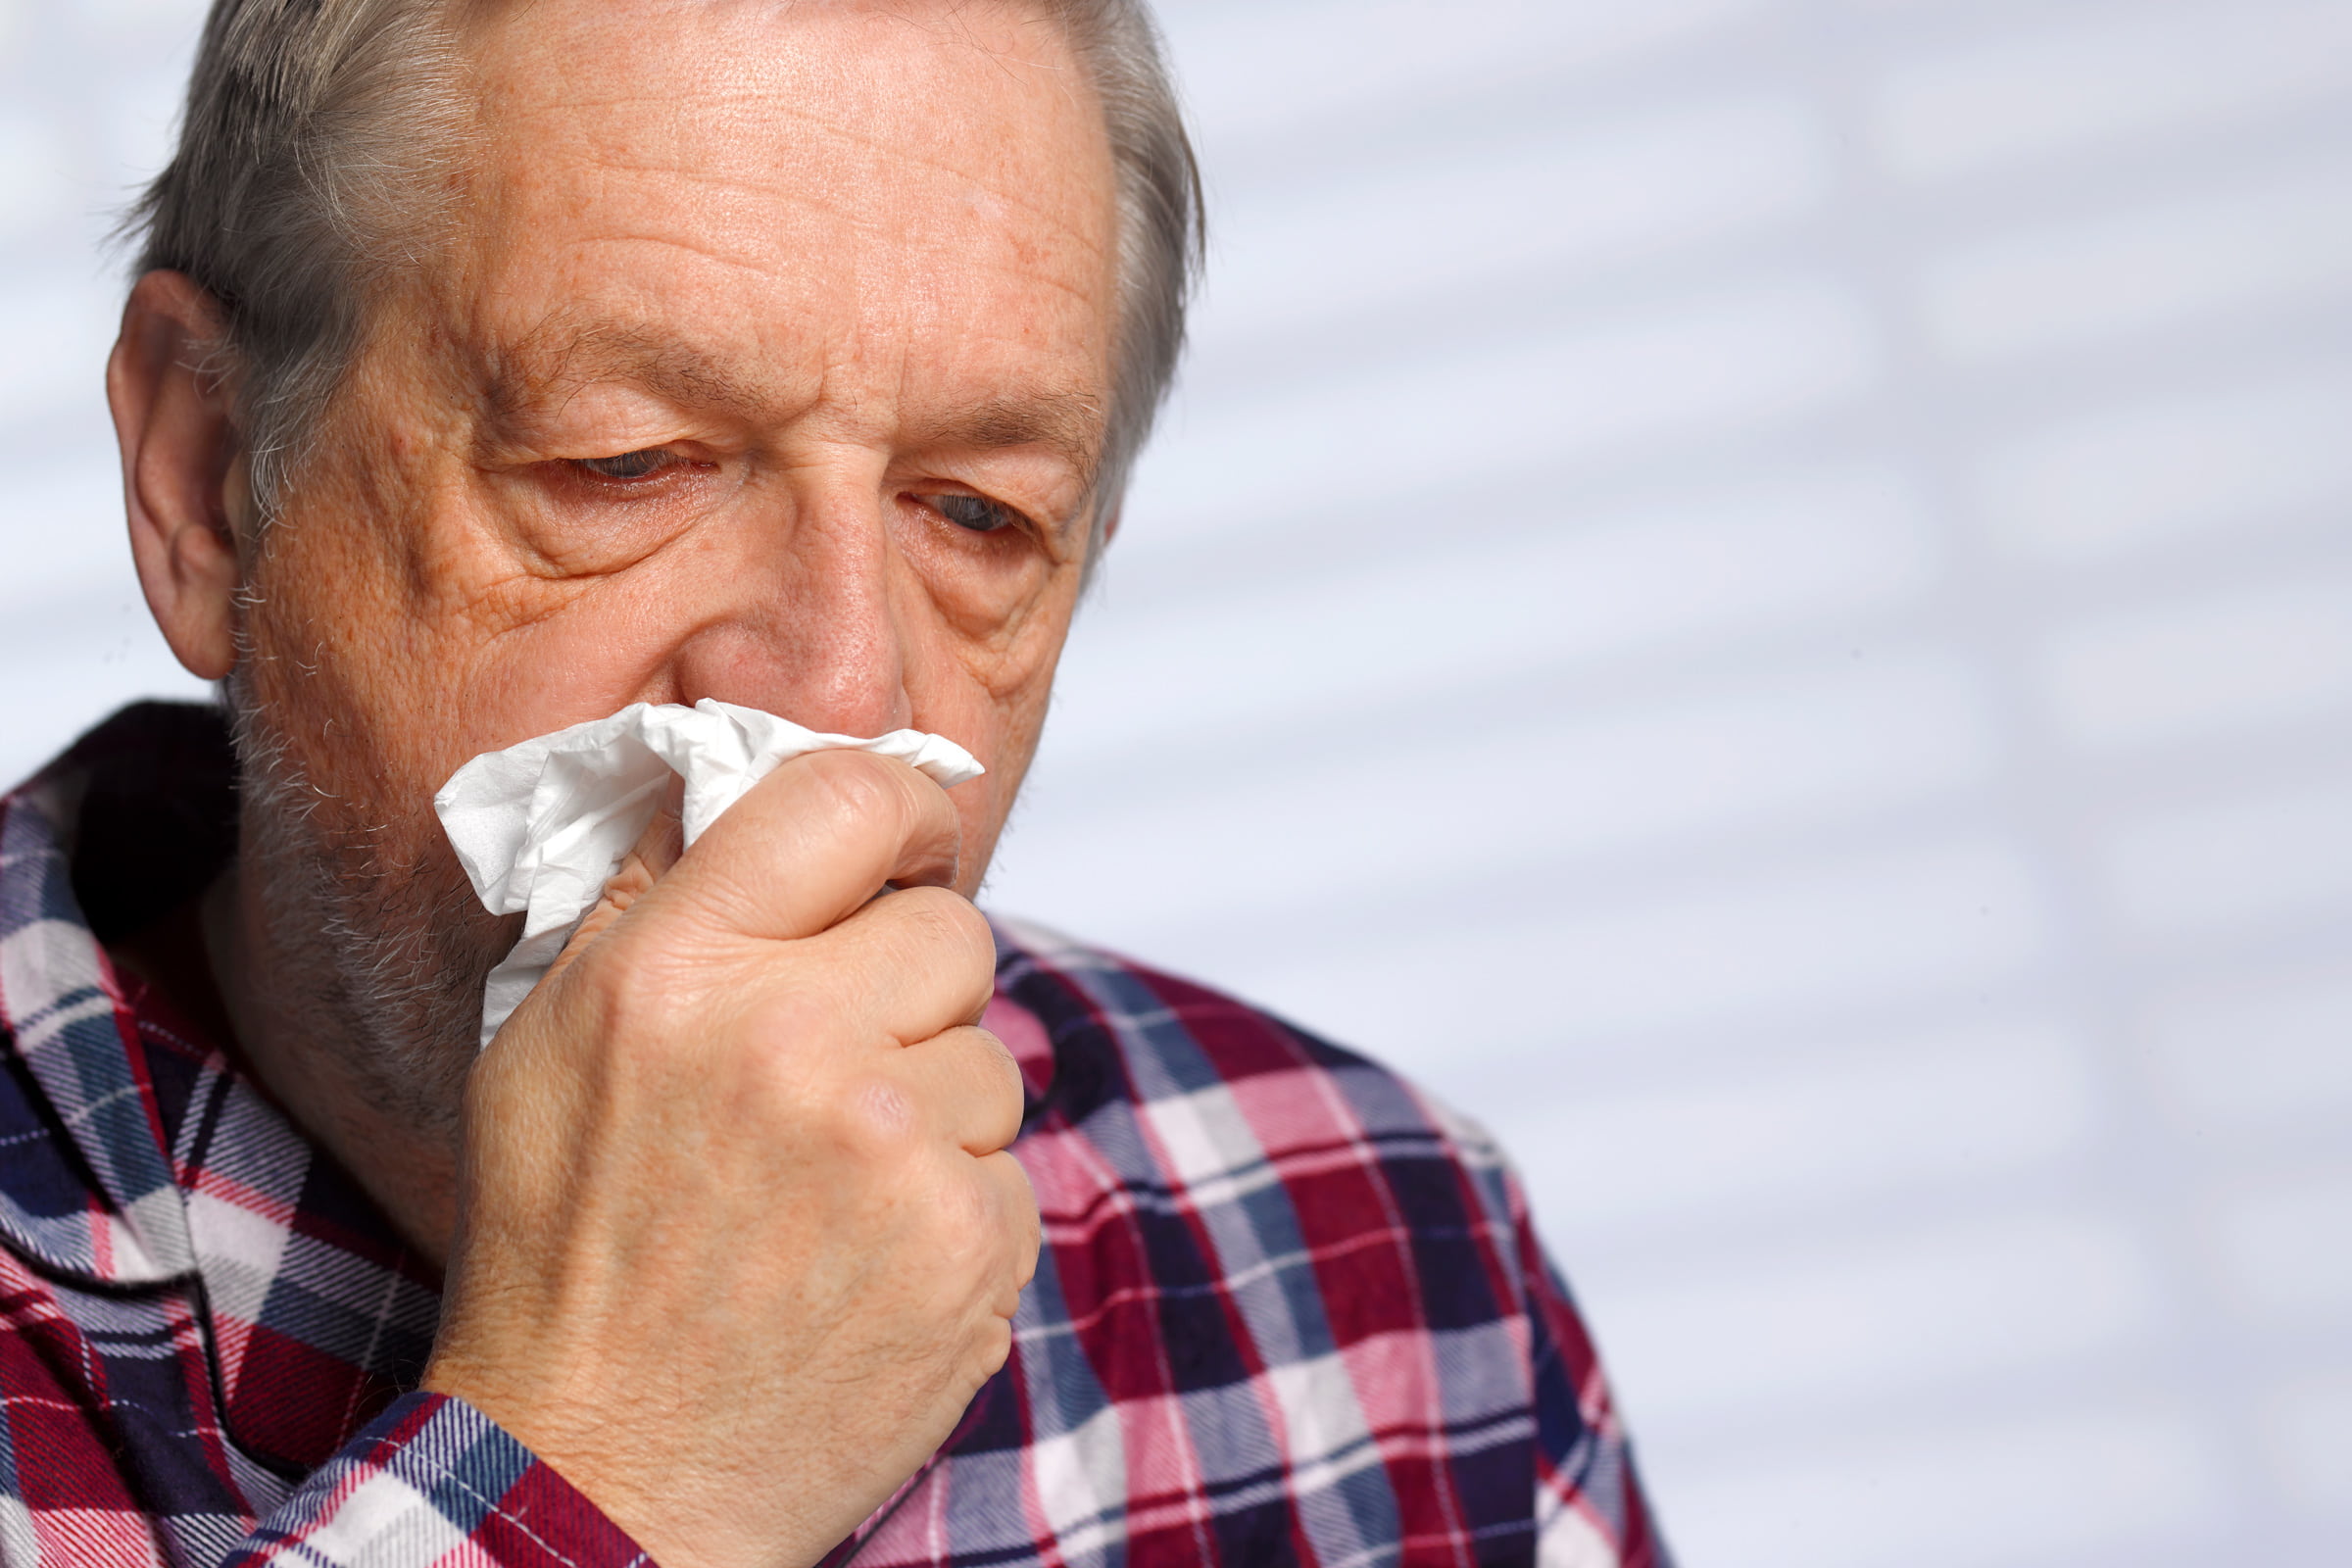 an older man holding a tissue to his mouth